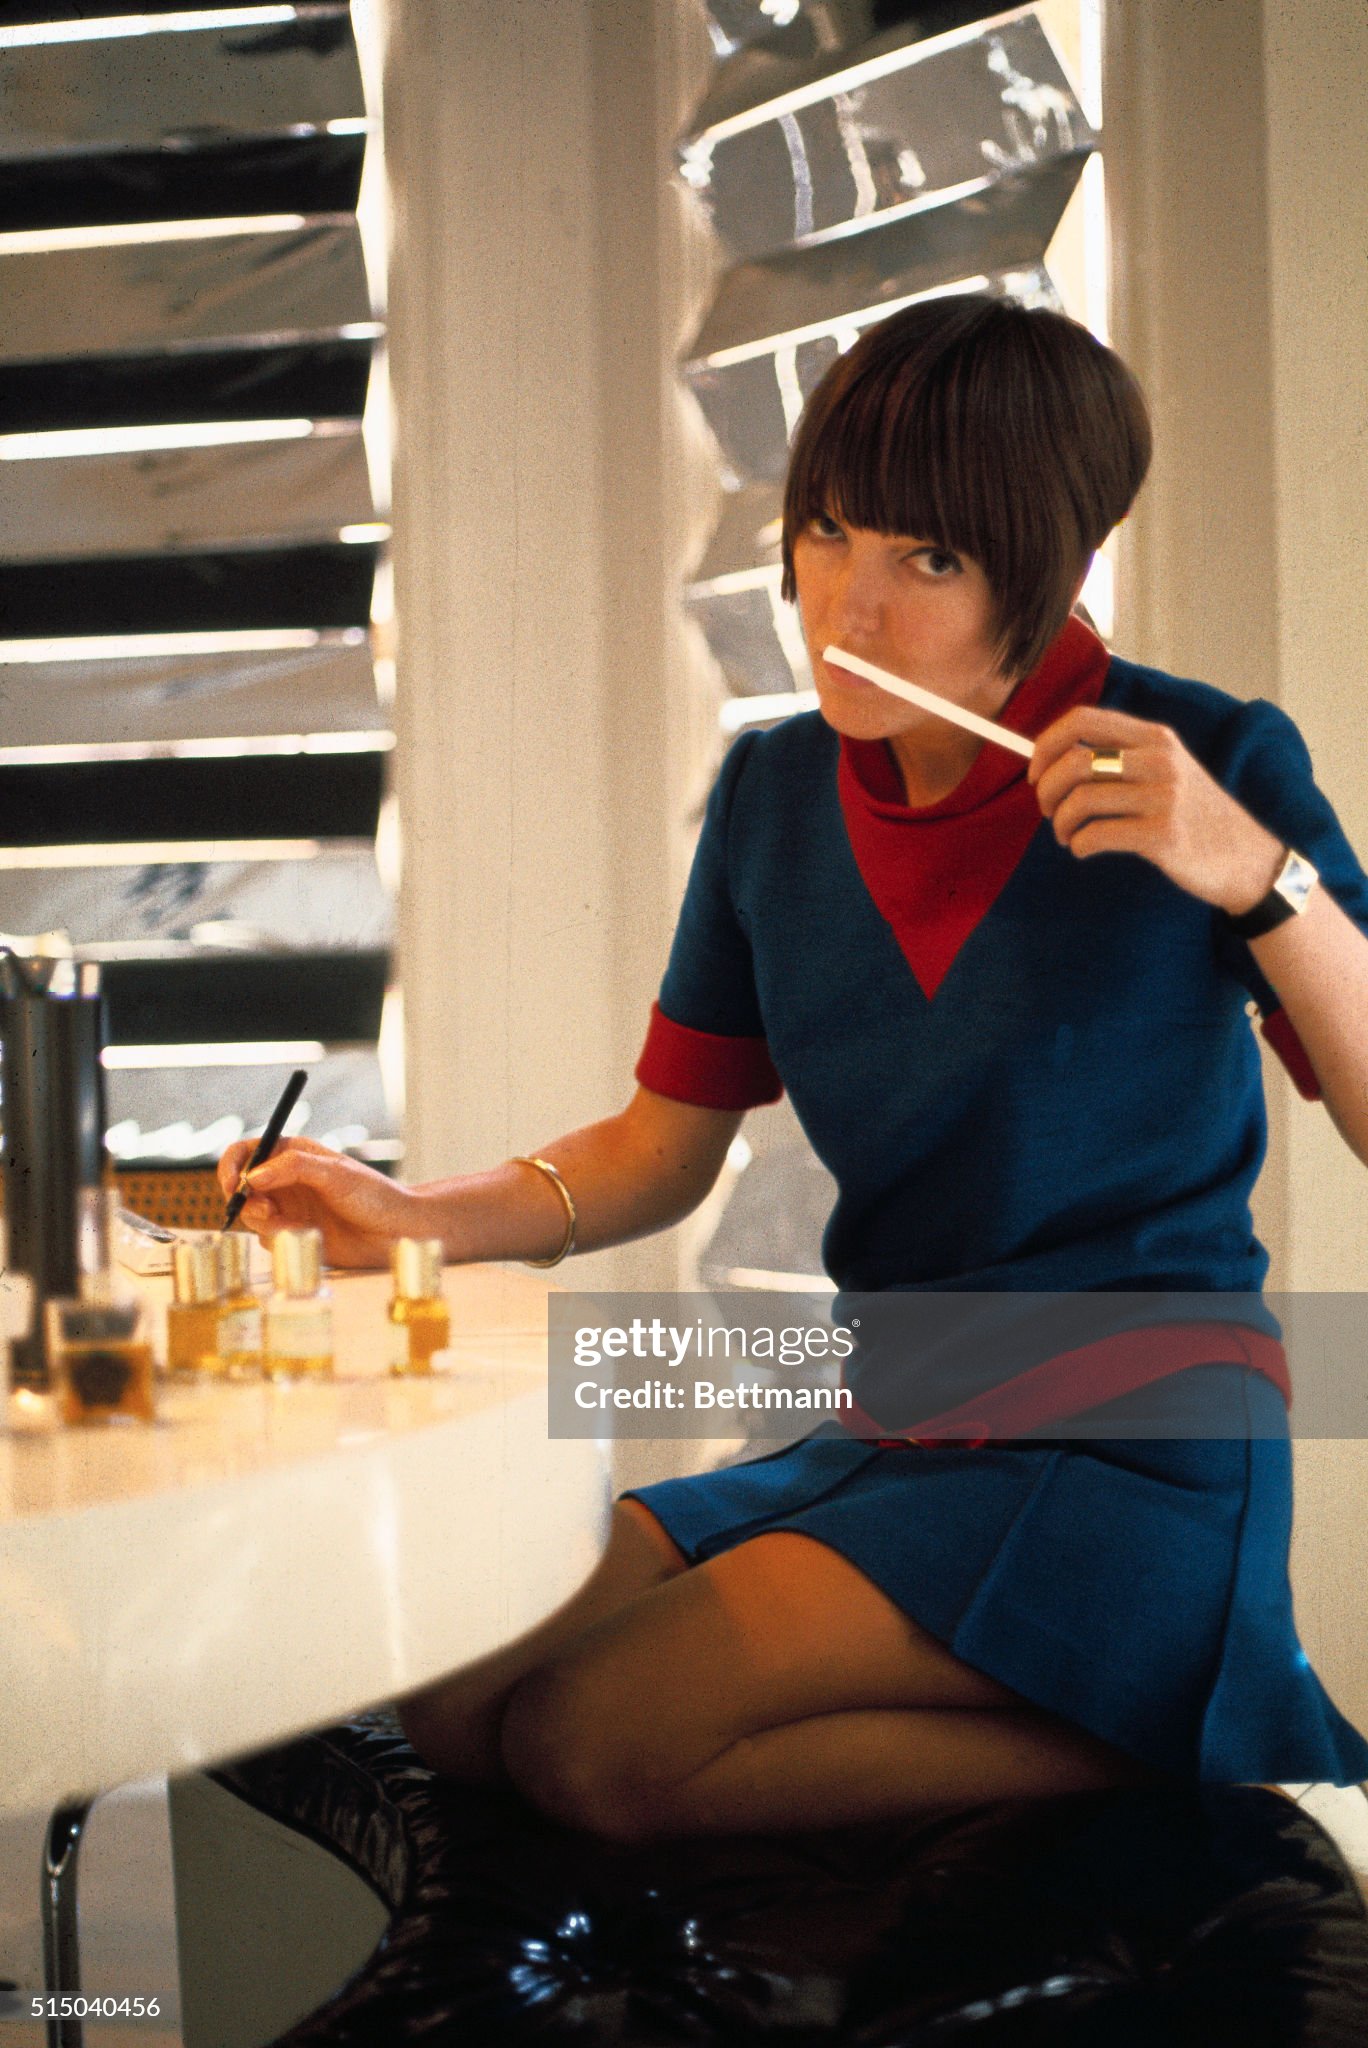 The fashion designer Mary Quant is seen at work in her studio on October 01, 1967.